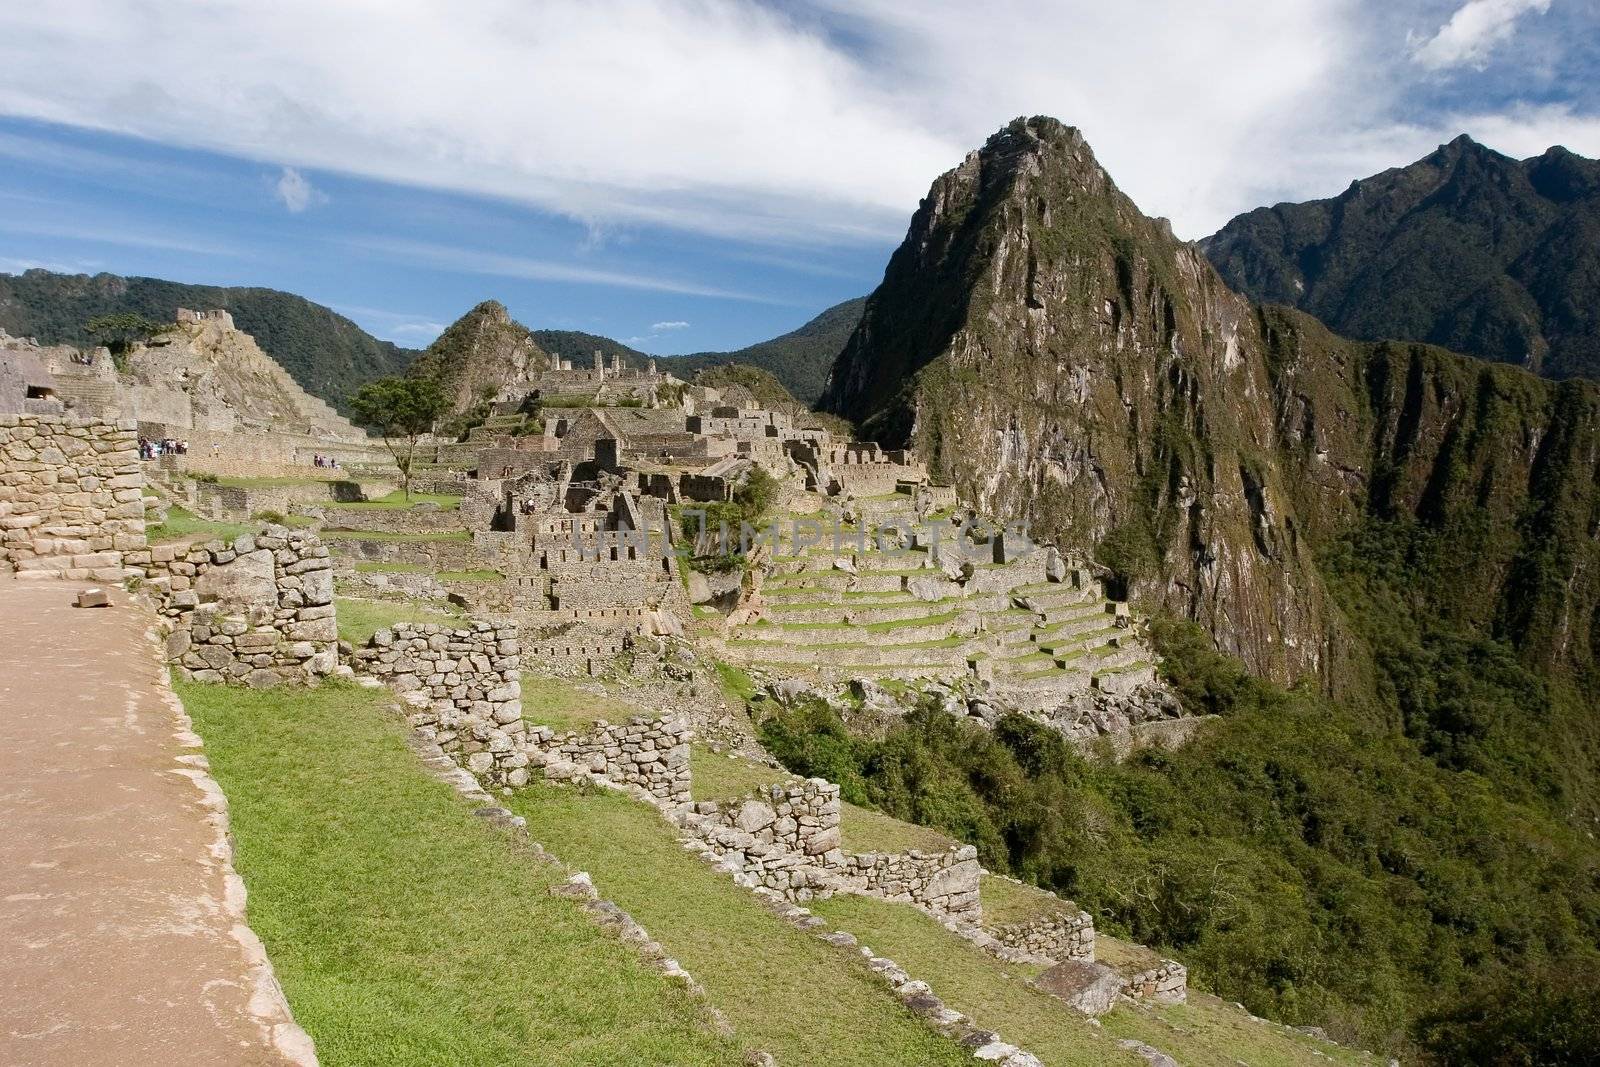 Machu Picchu (Quechua: Machu Picchu, "Old Peak") is a pre-Columbian Inca site located 2,400 meters (7,875 ft) above sea level[1]. It is situated on a mountain ridge above the Urubamba Valley in Peru, which is 80 km (50 mi) northwest of Cusco.